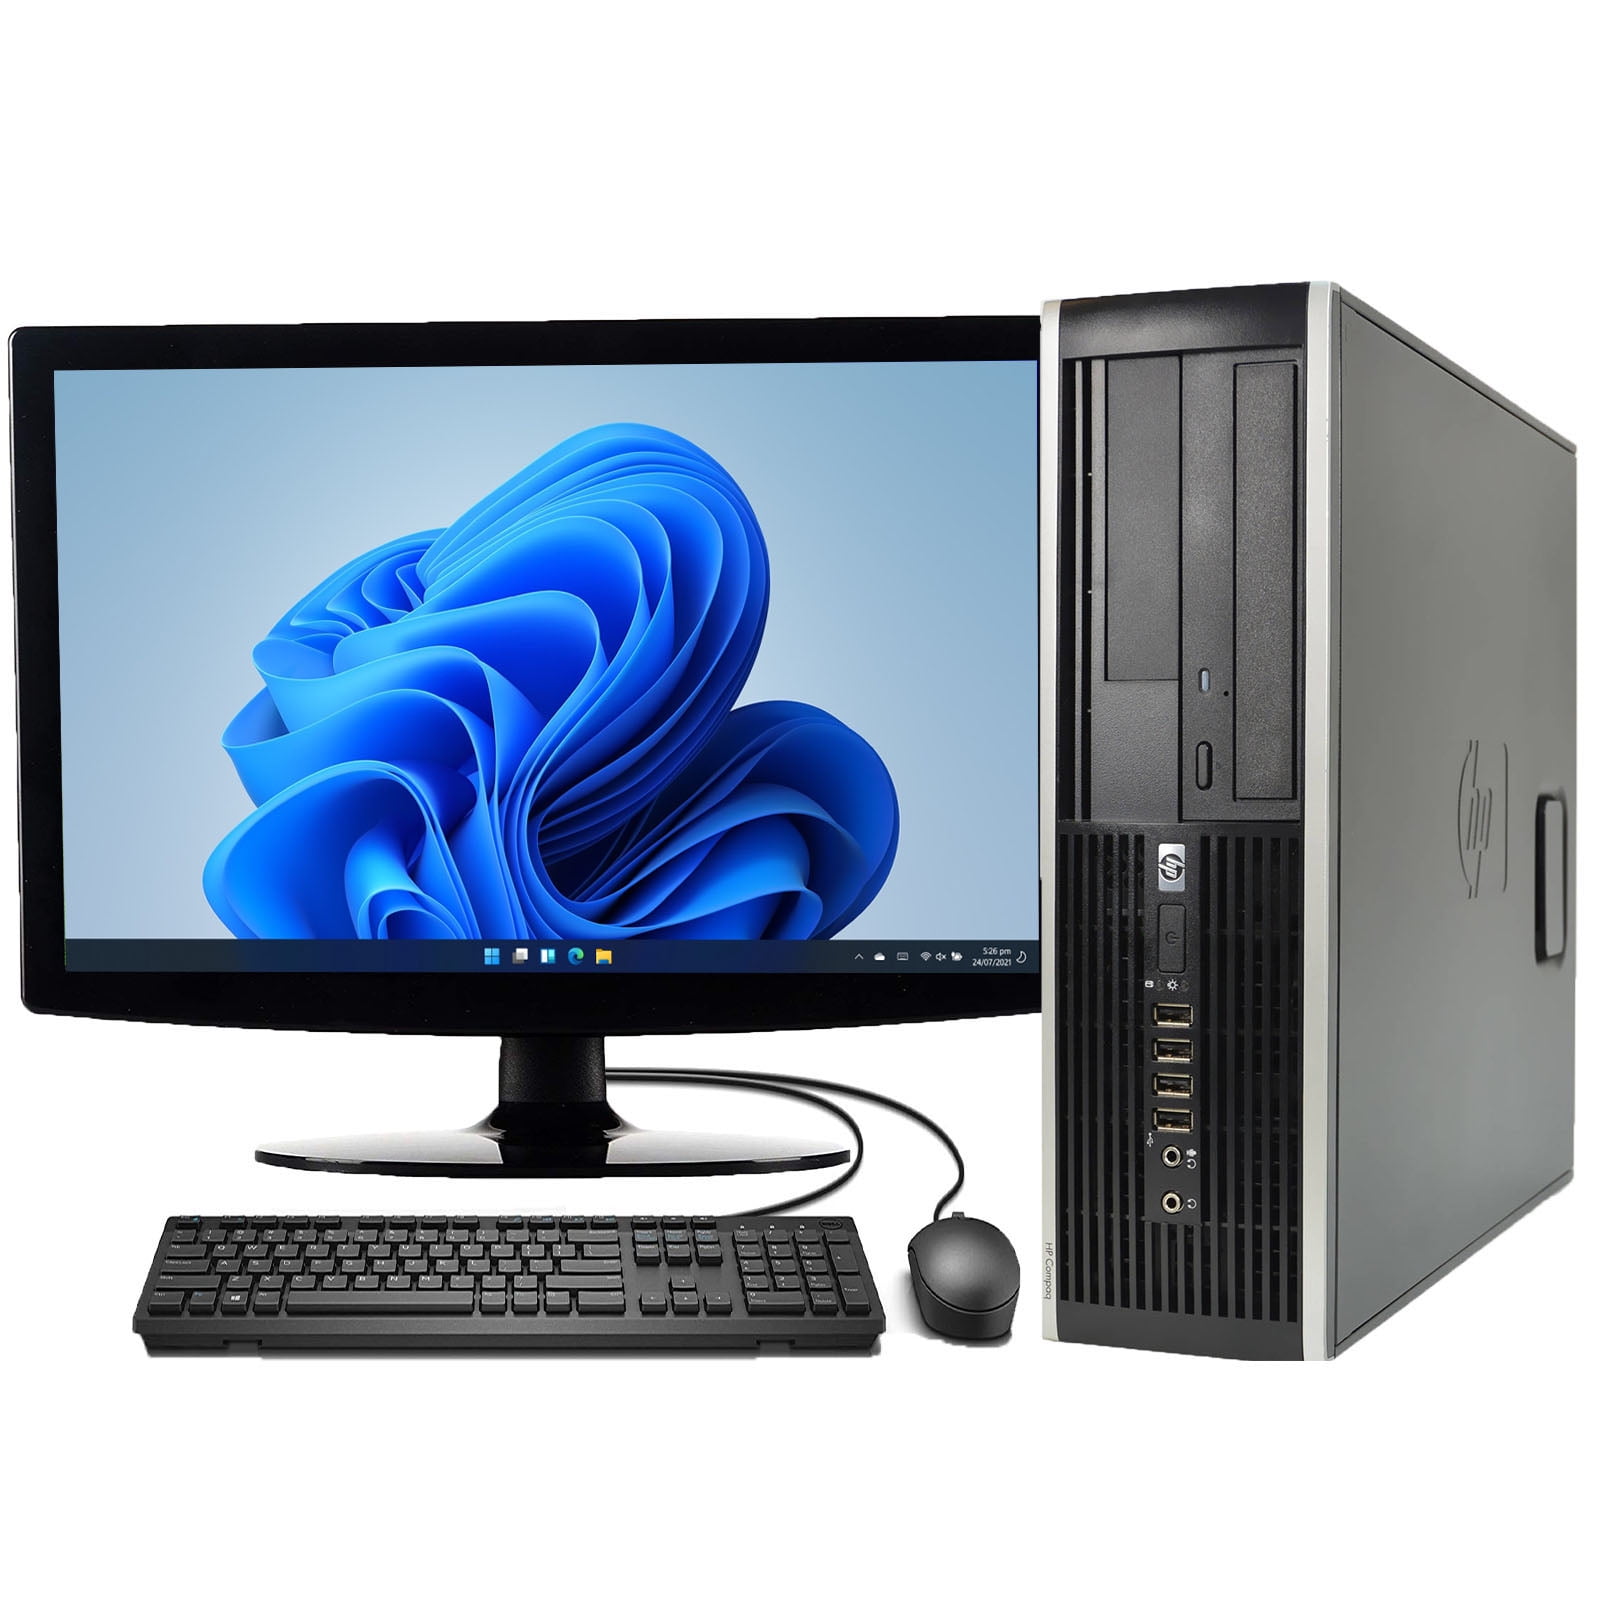 scherp deelnemer En team Used HP Elite Windows 11 Pro Desktop Computer with an Intel Quad Core i5  CPU 4GB RAM 250GB HD DVD-RW Wifi and a 19" LCD -Used Computer with 1 Year  Warranty! -